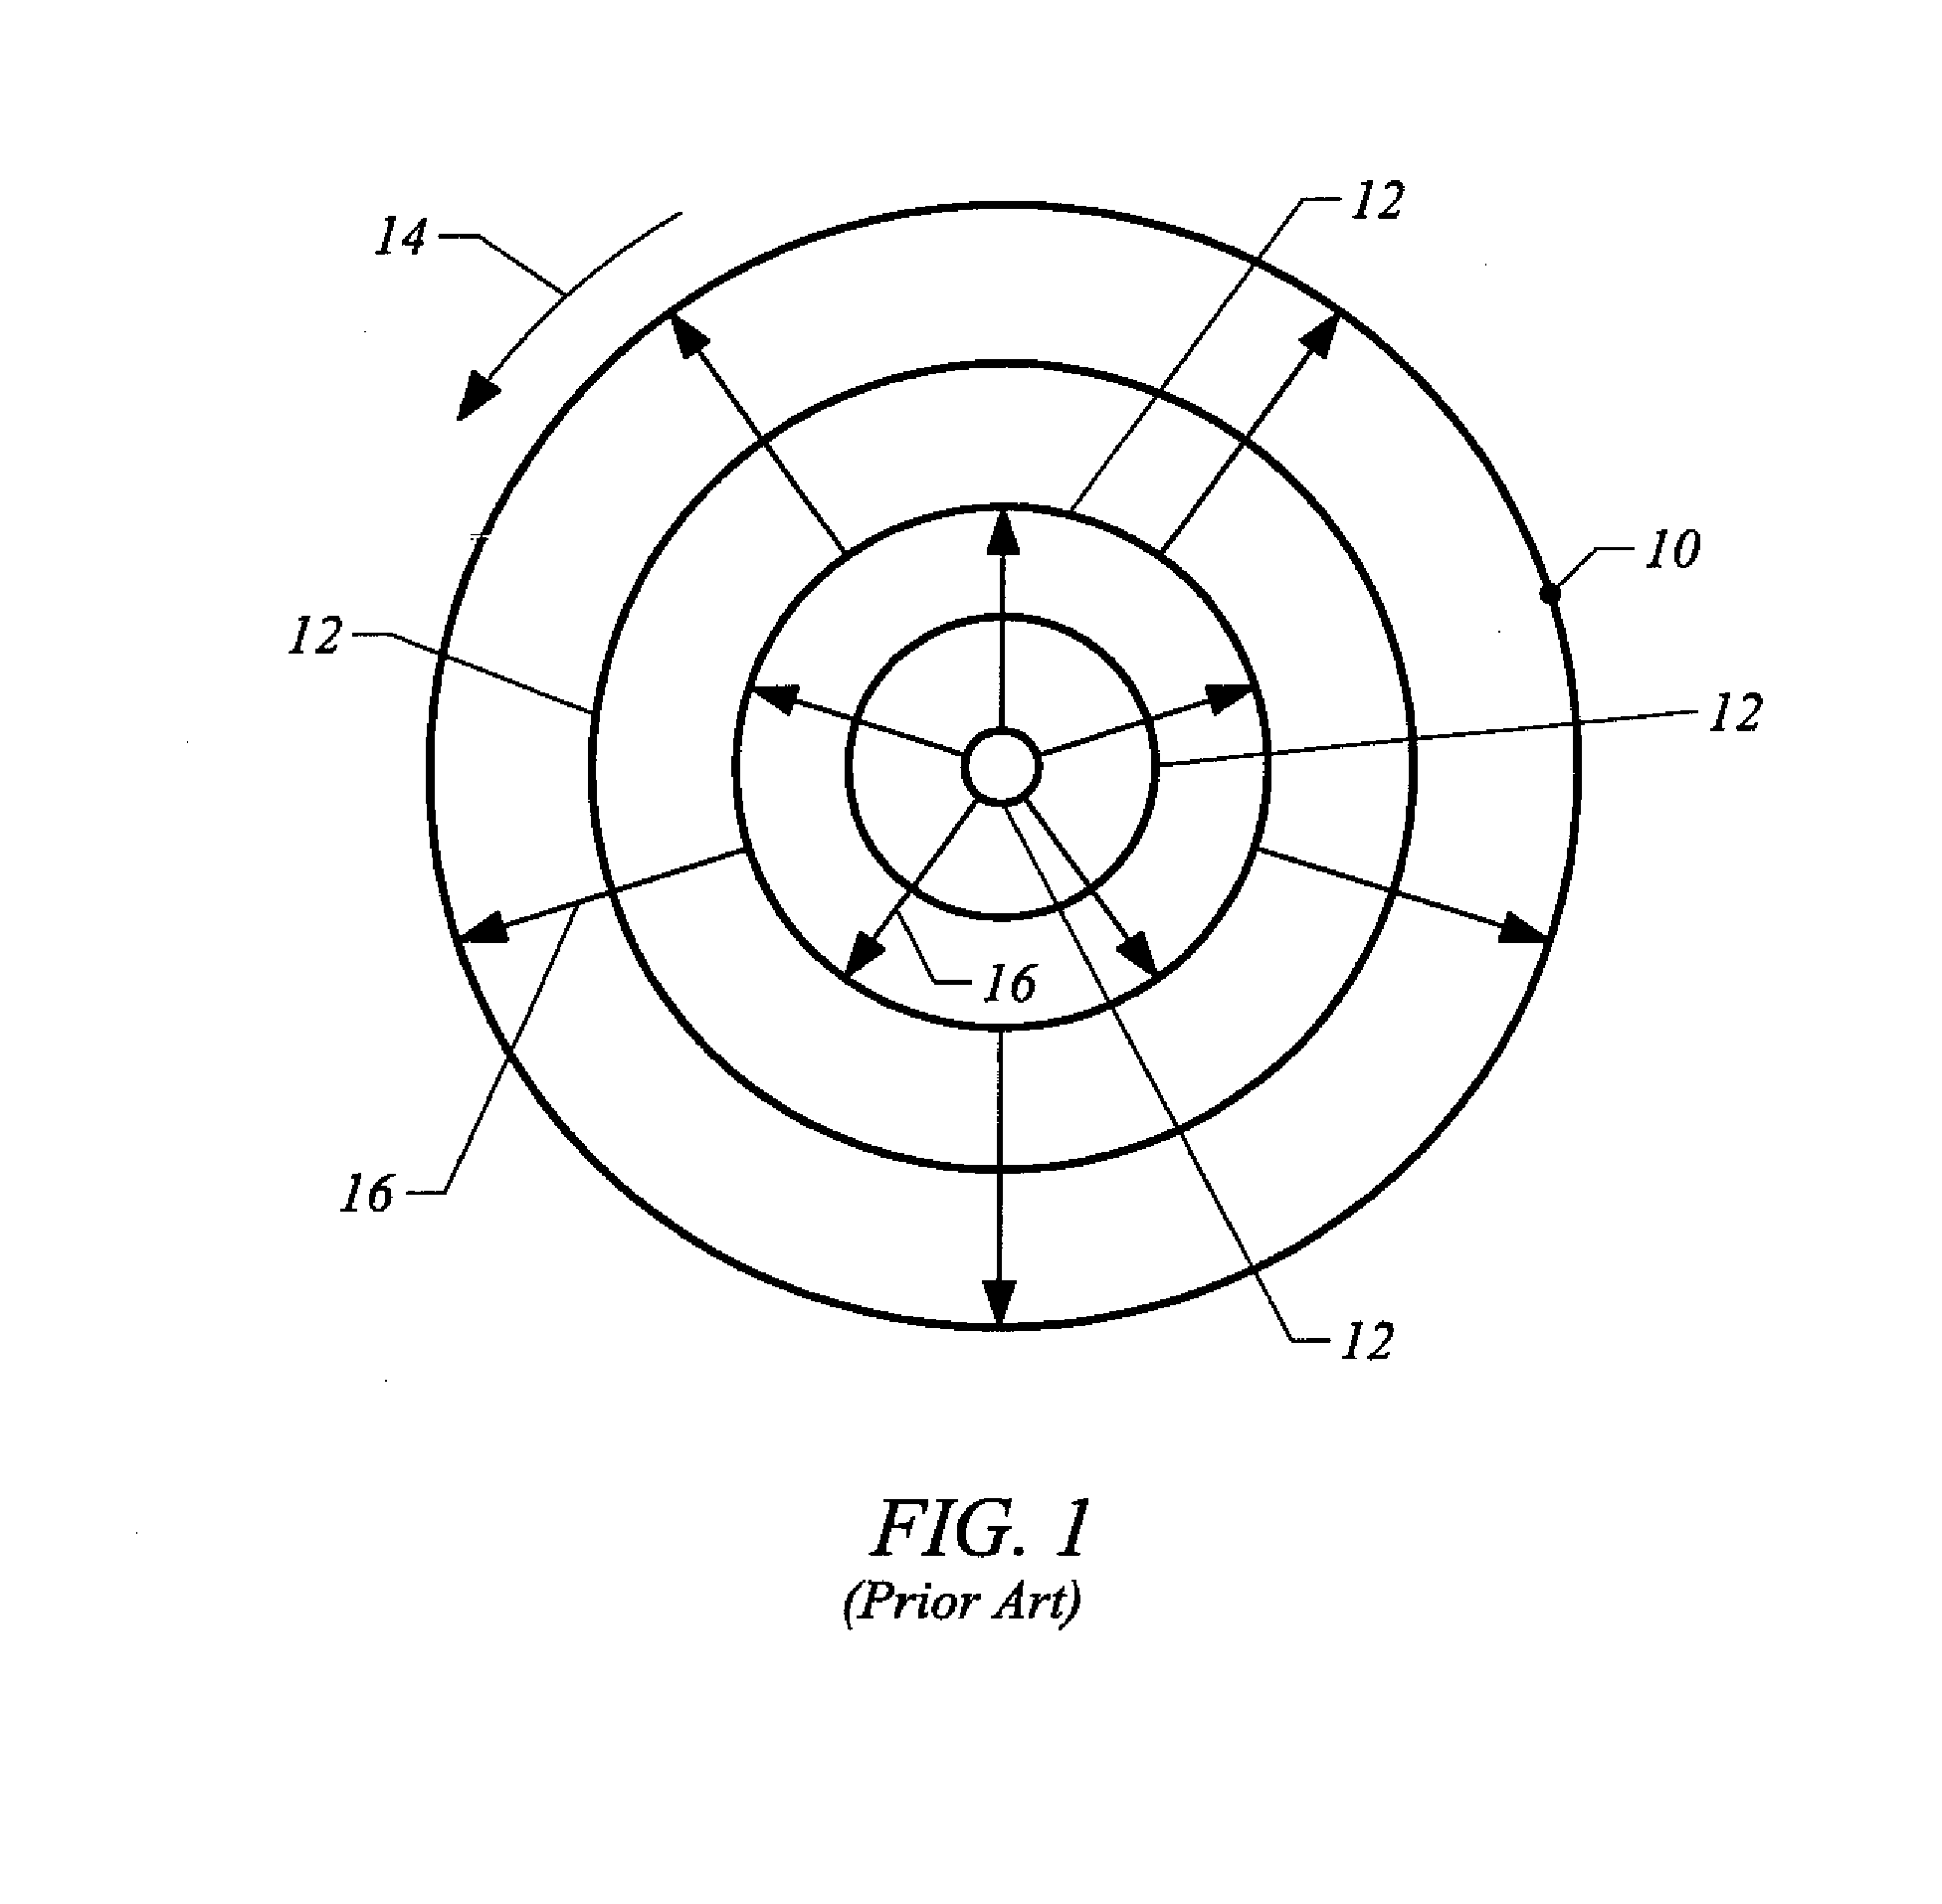 Methods for drying semiconductor wafer surfaces using a plurality of inlets and outlets held in close proximity to the wafer surfaces